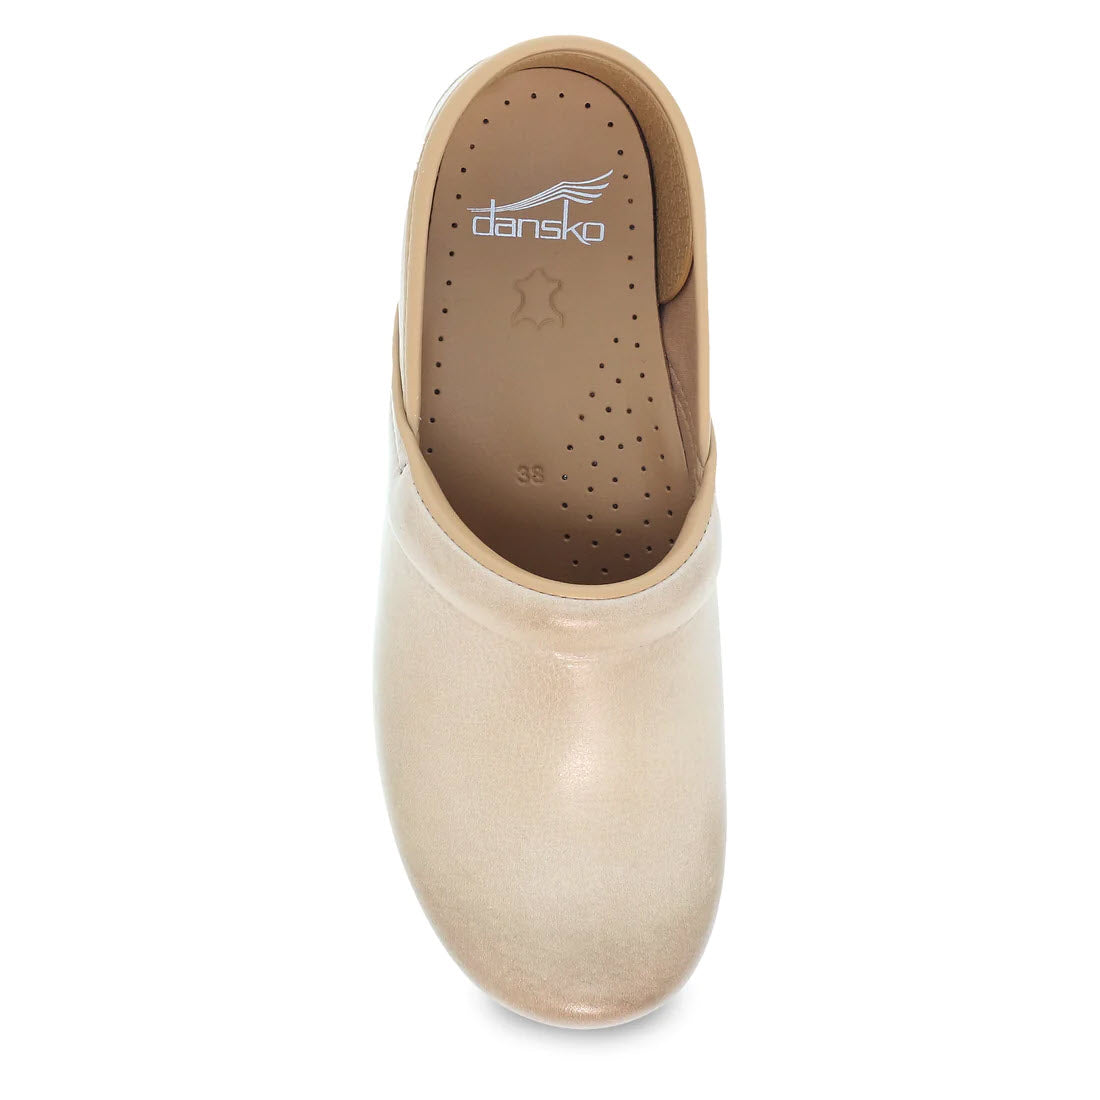 A single beige Dansko Professional clog viewed from above.